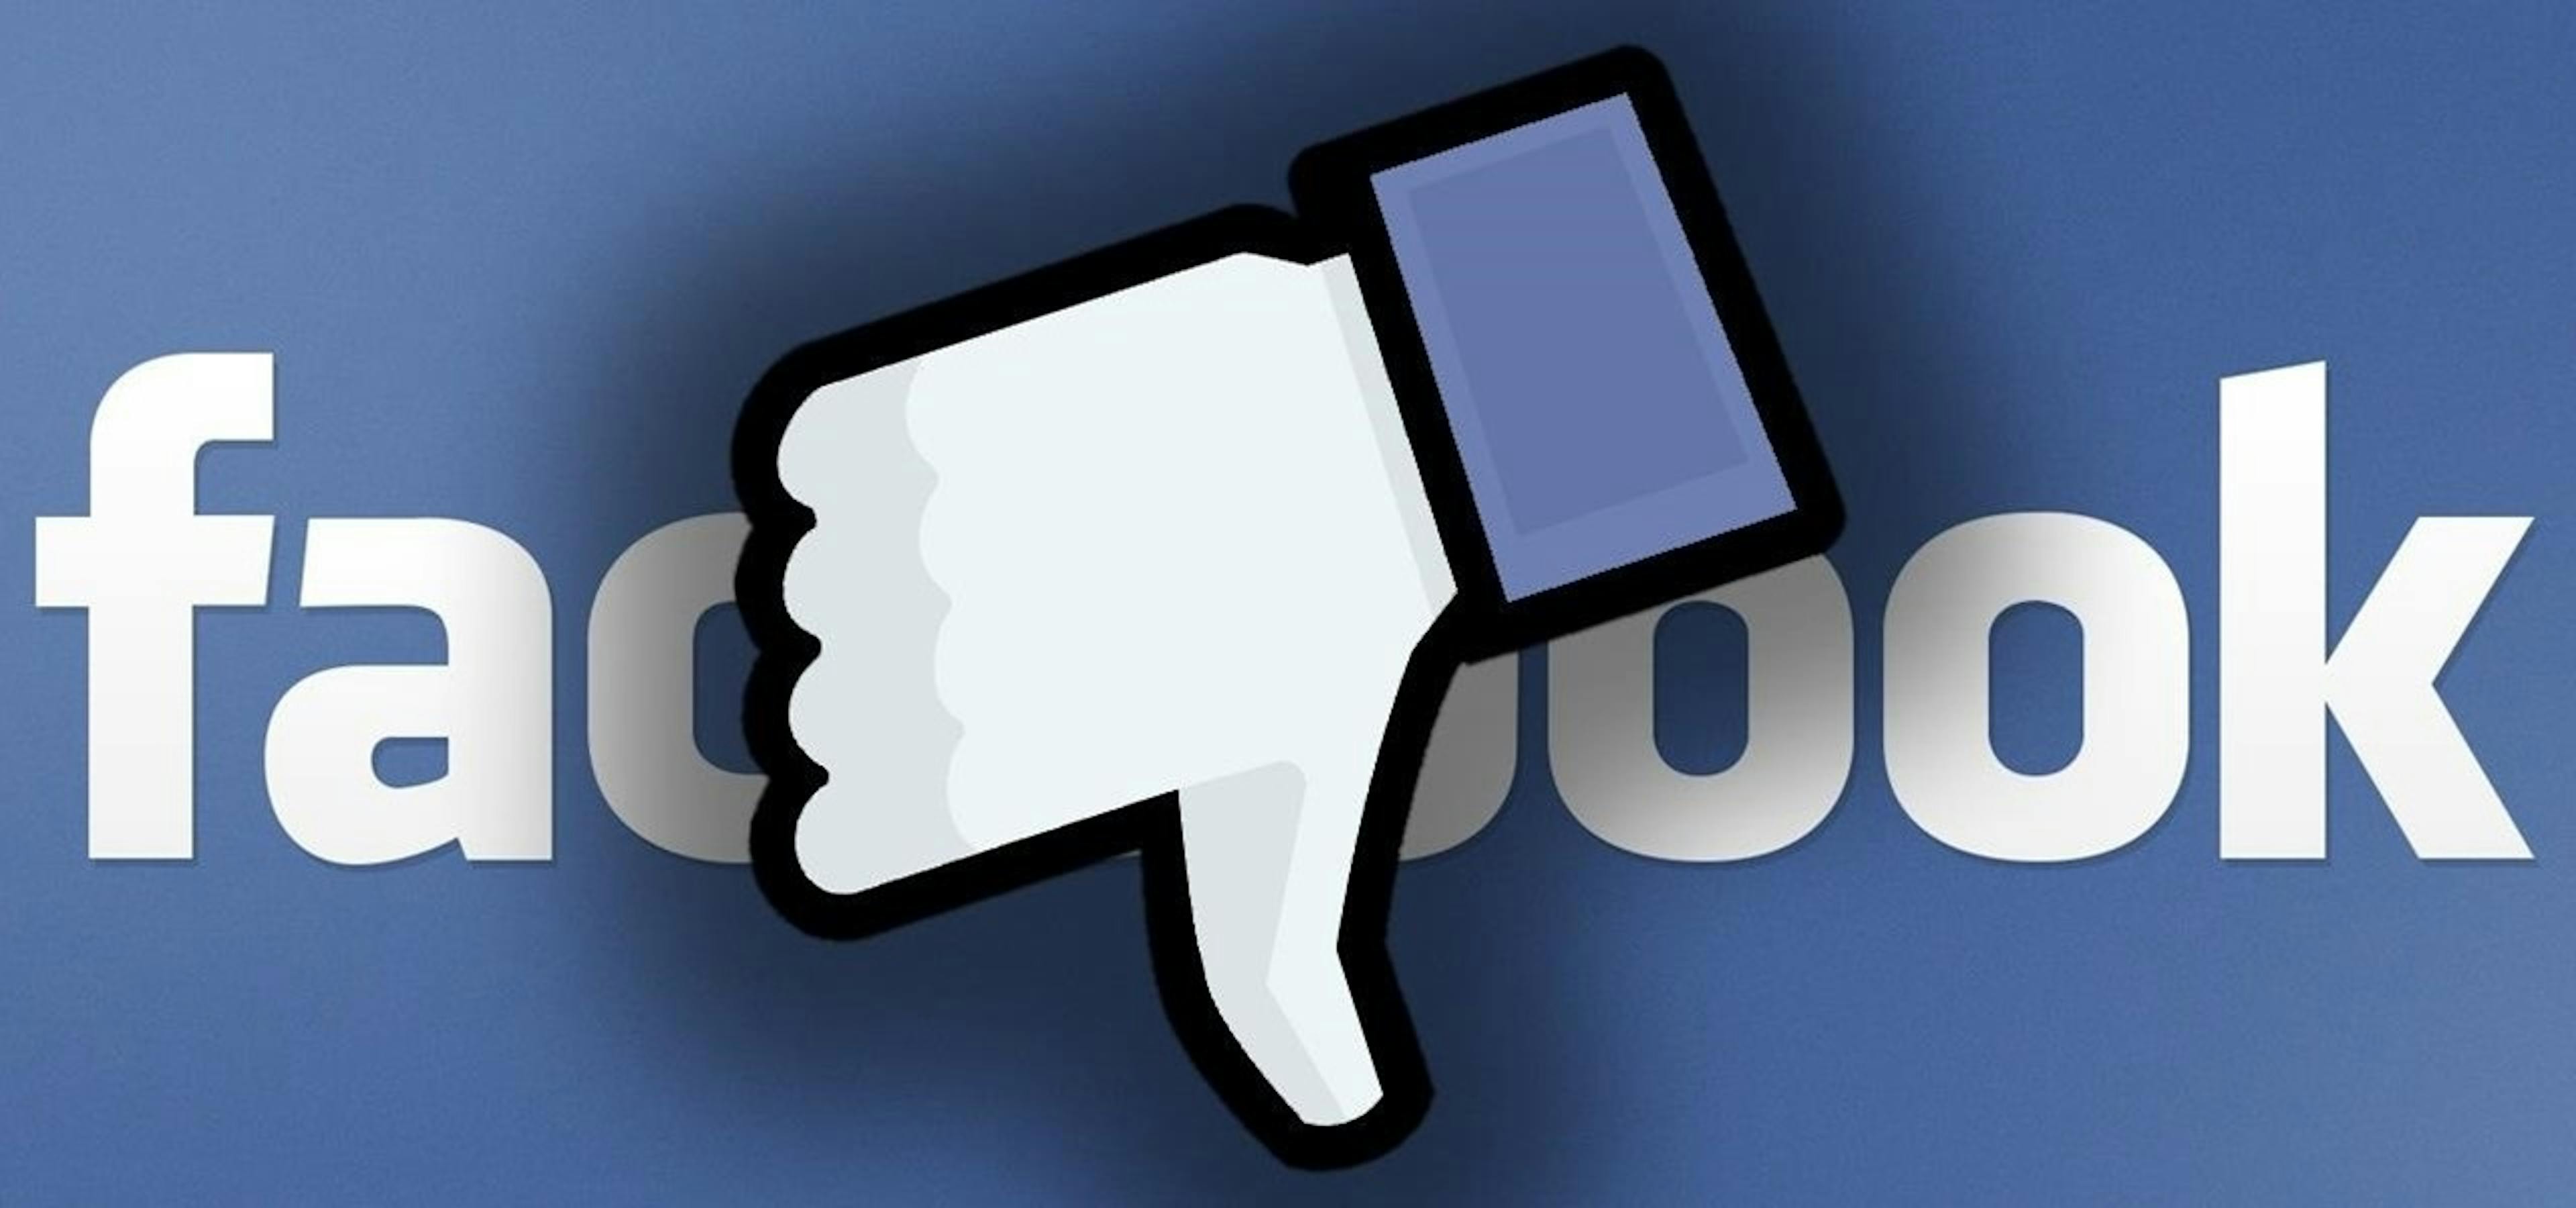 featured image - Facebook Has Managed To Mess Up Beyond All Common Sense. A Social Media Nightmare 